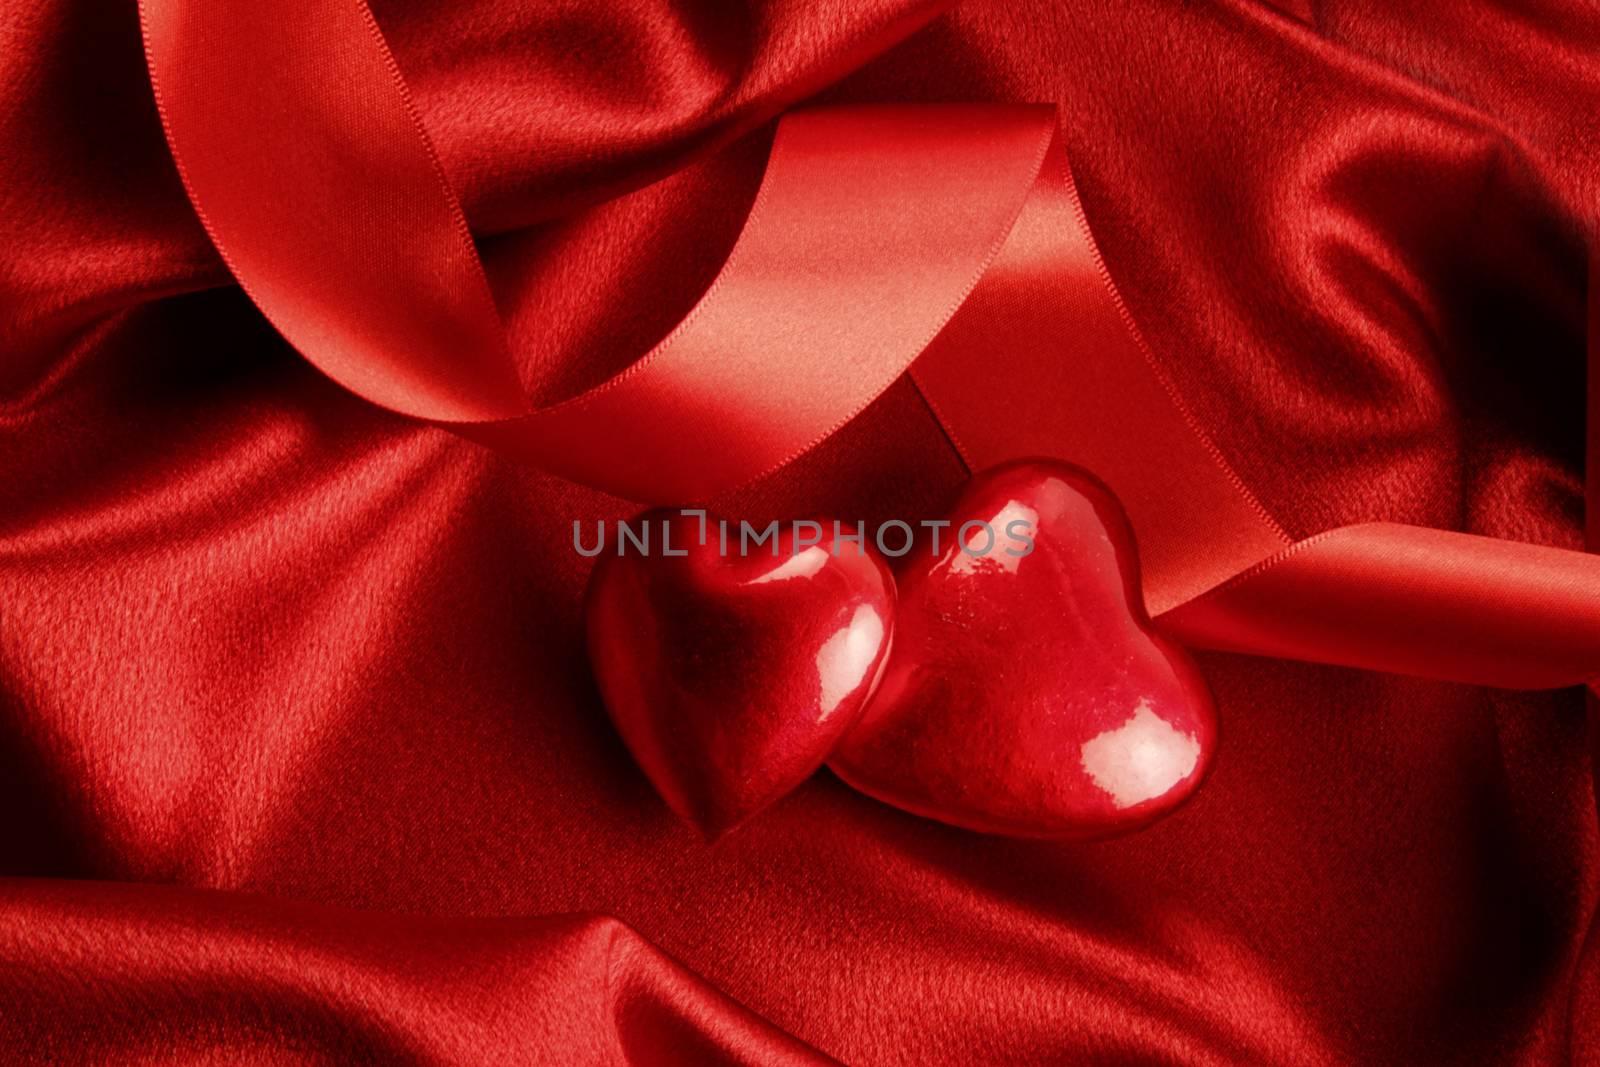 Red hearts on satin background by Sandralise